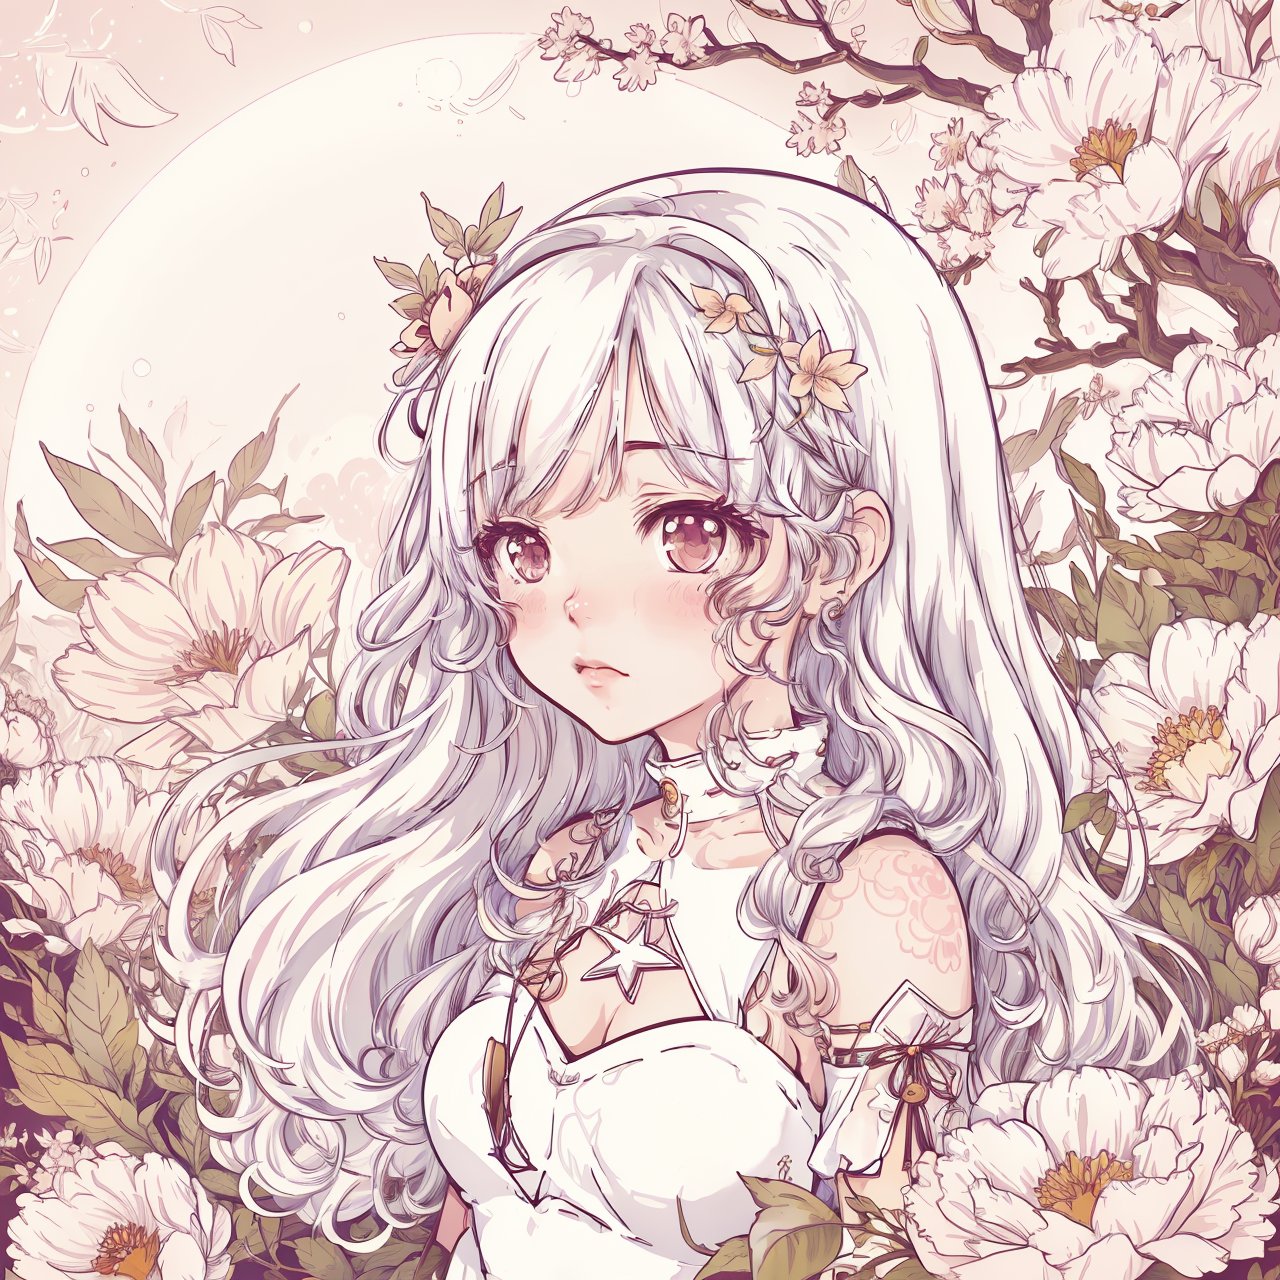 Hq drawing illustration of an adorable chibi girl , white hair ,cute art ,64k, depth of field ,   foliage and flowers and branch, full moon , 
 ,xewx illustration style 